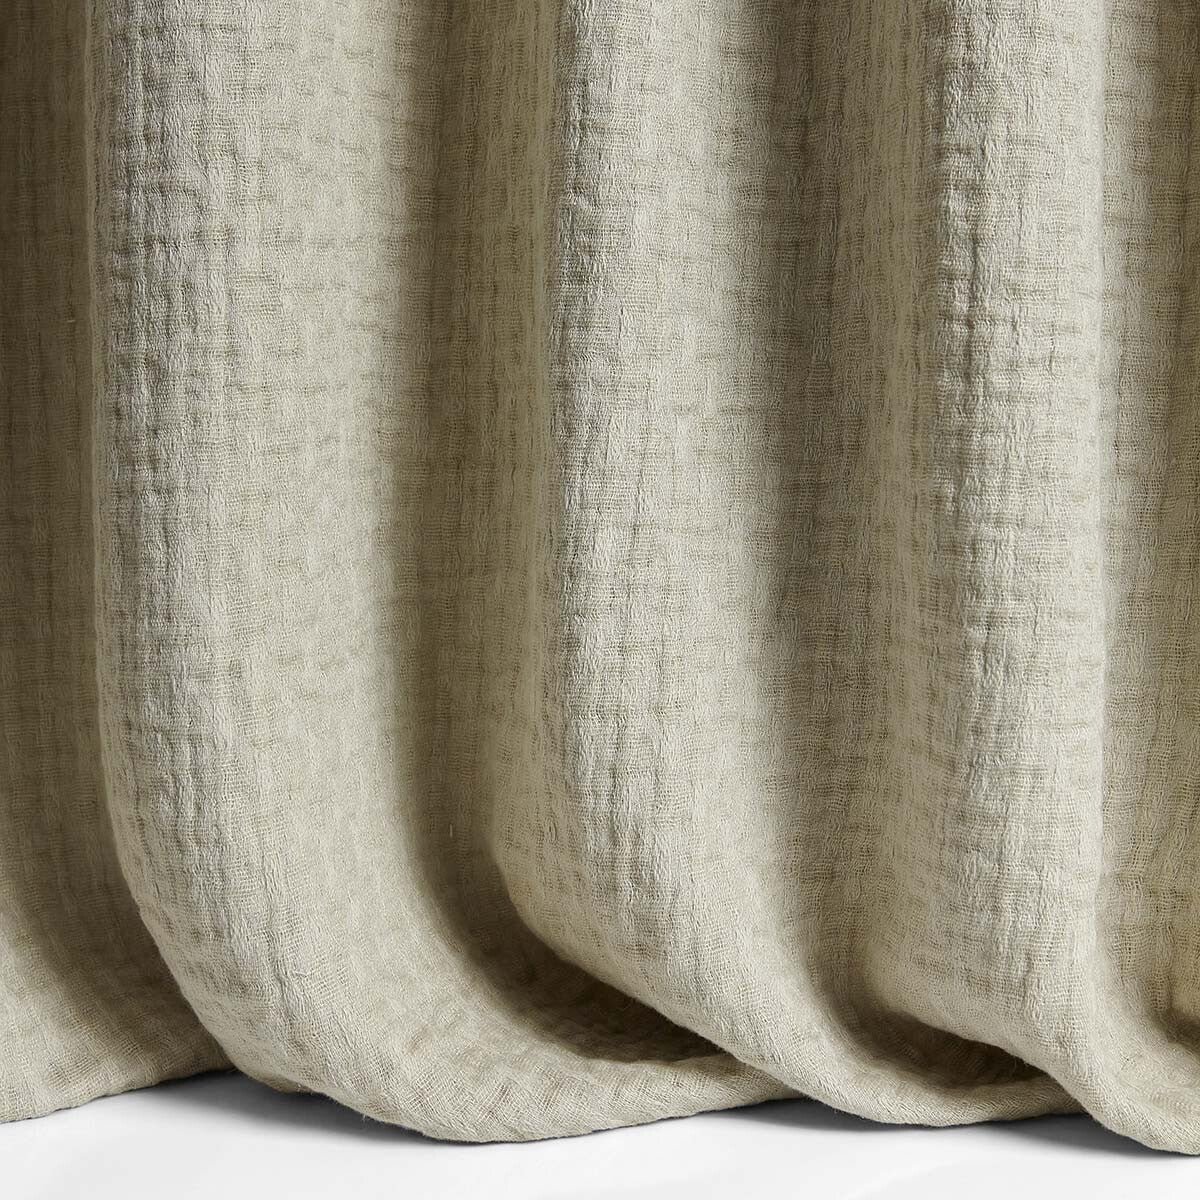 Crotchet fabric in 6 color - pattern LZ-30405.06.0 - by Kravet Couture in the Lizzo collection